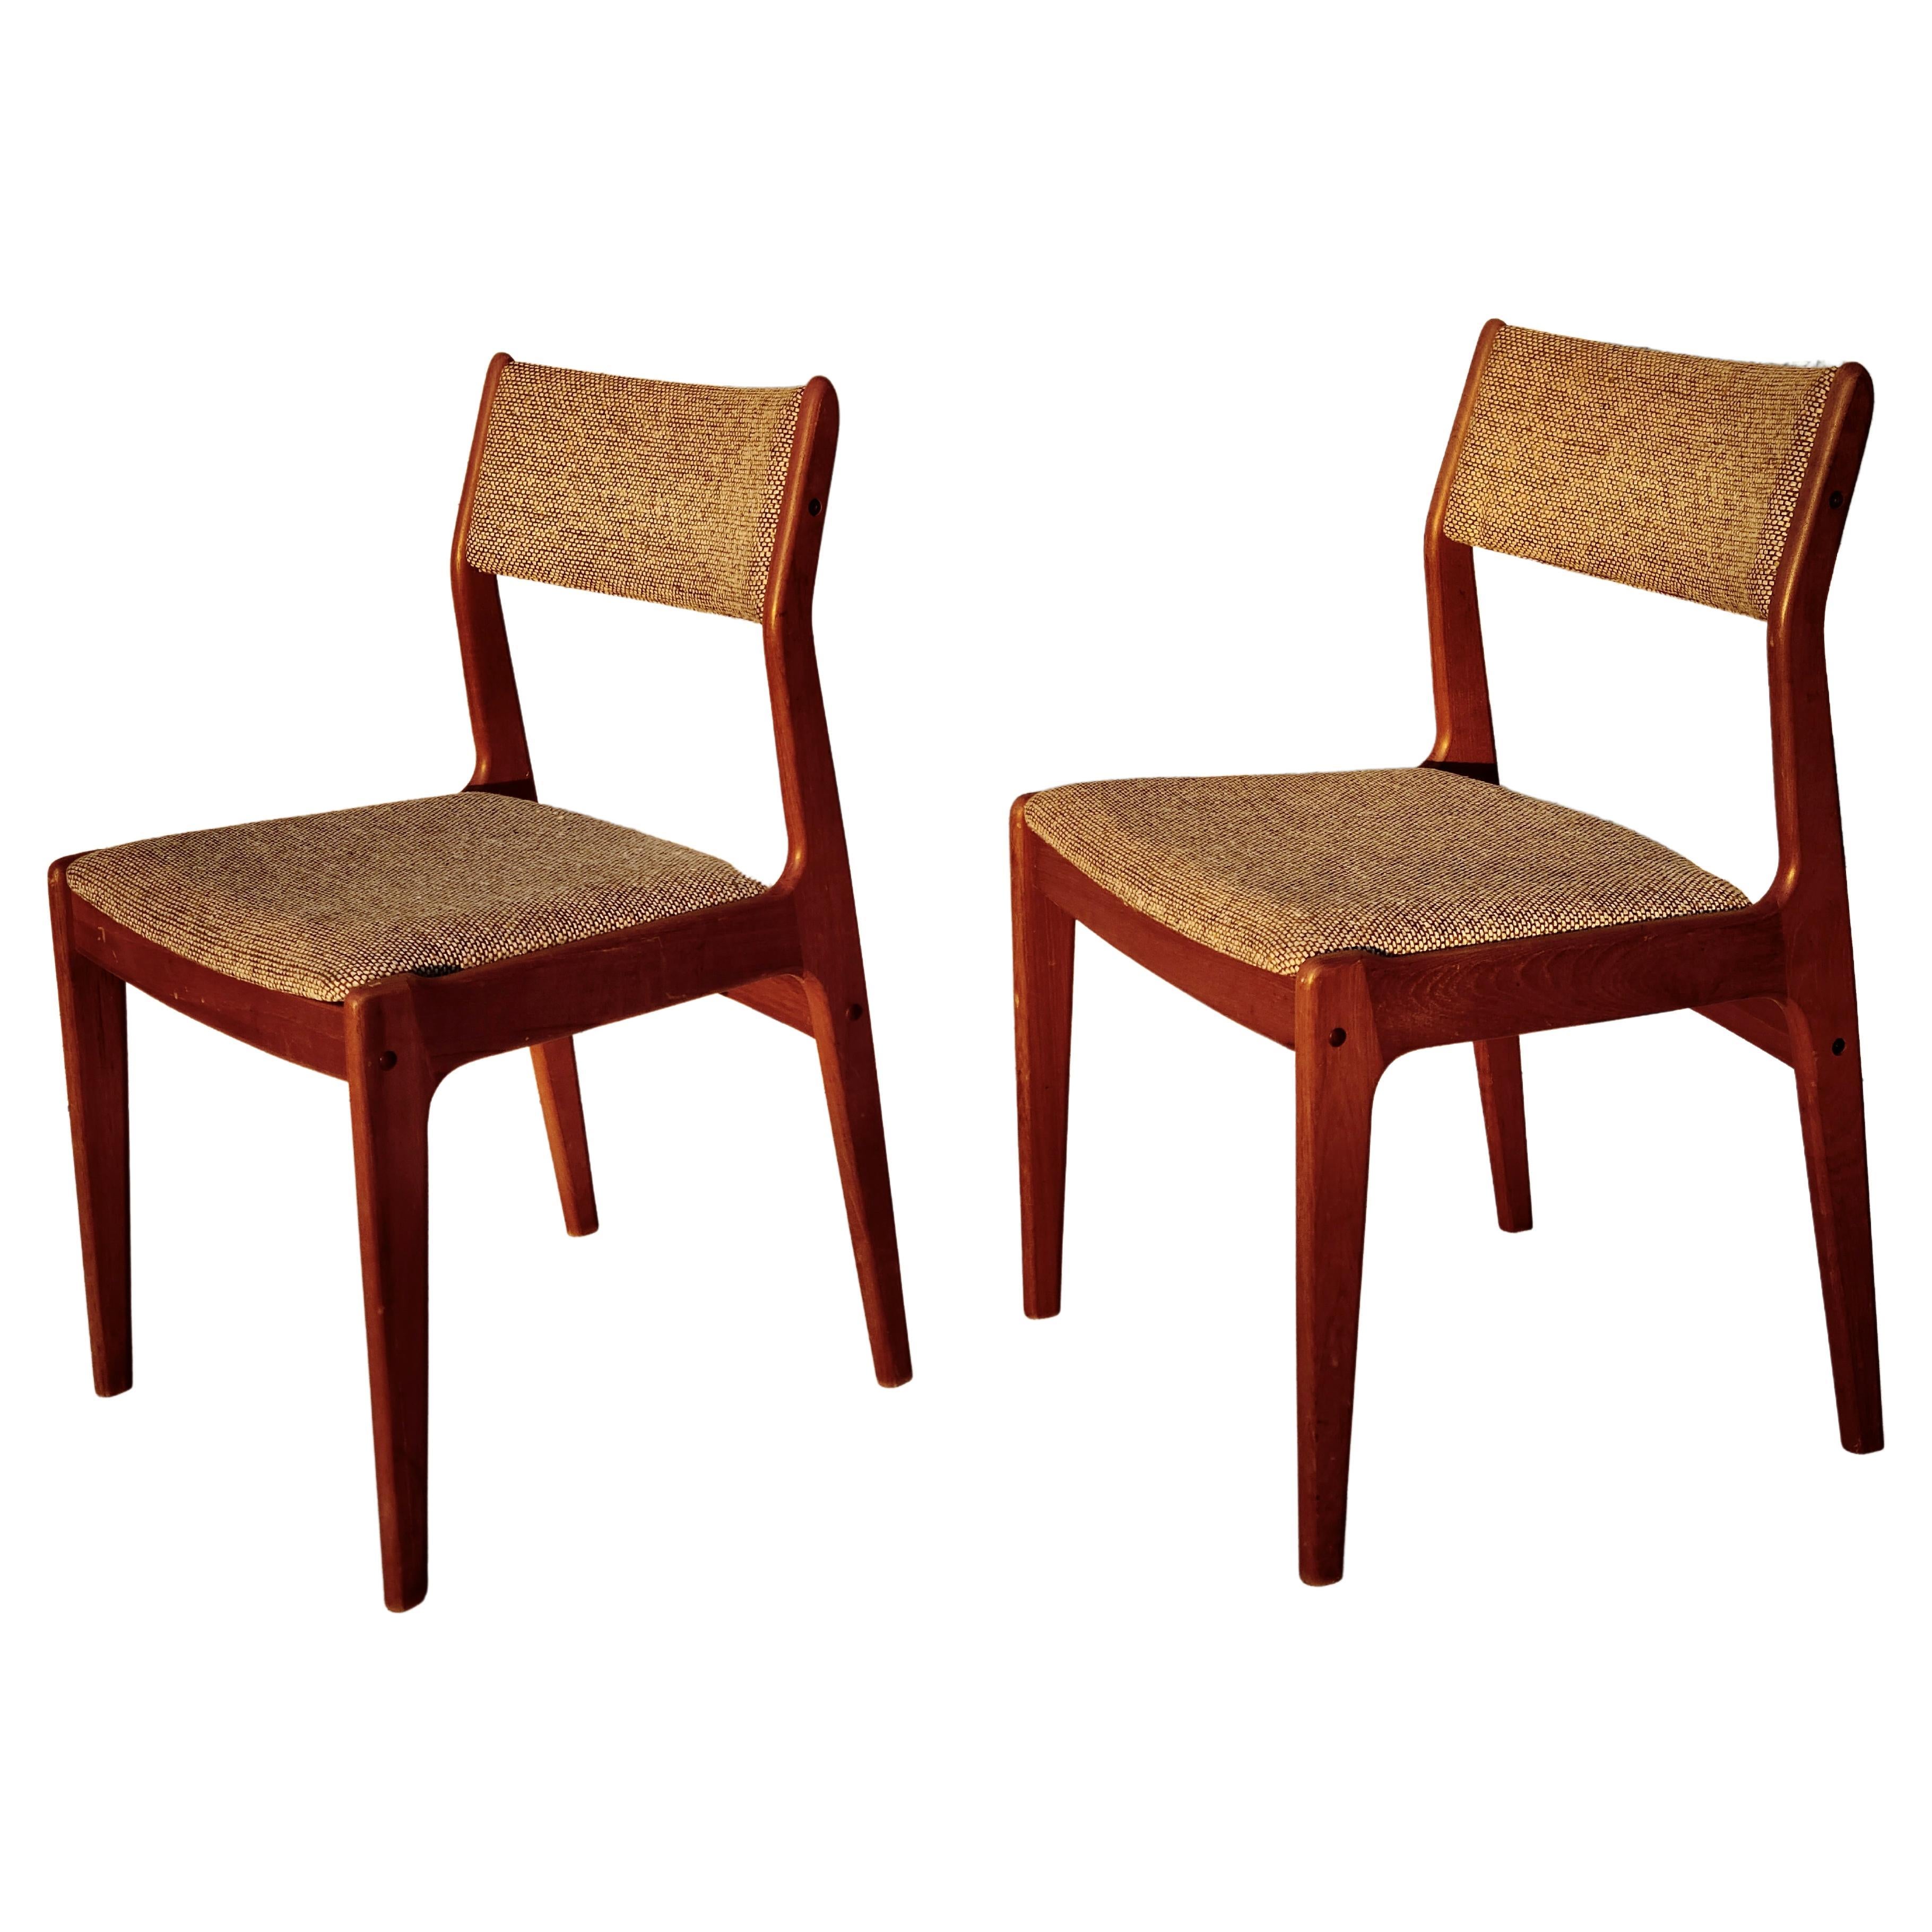 Late 20th Century Set of 6 Sculpted Teak Dining chairs in the Style of Benny Linden